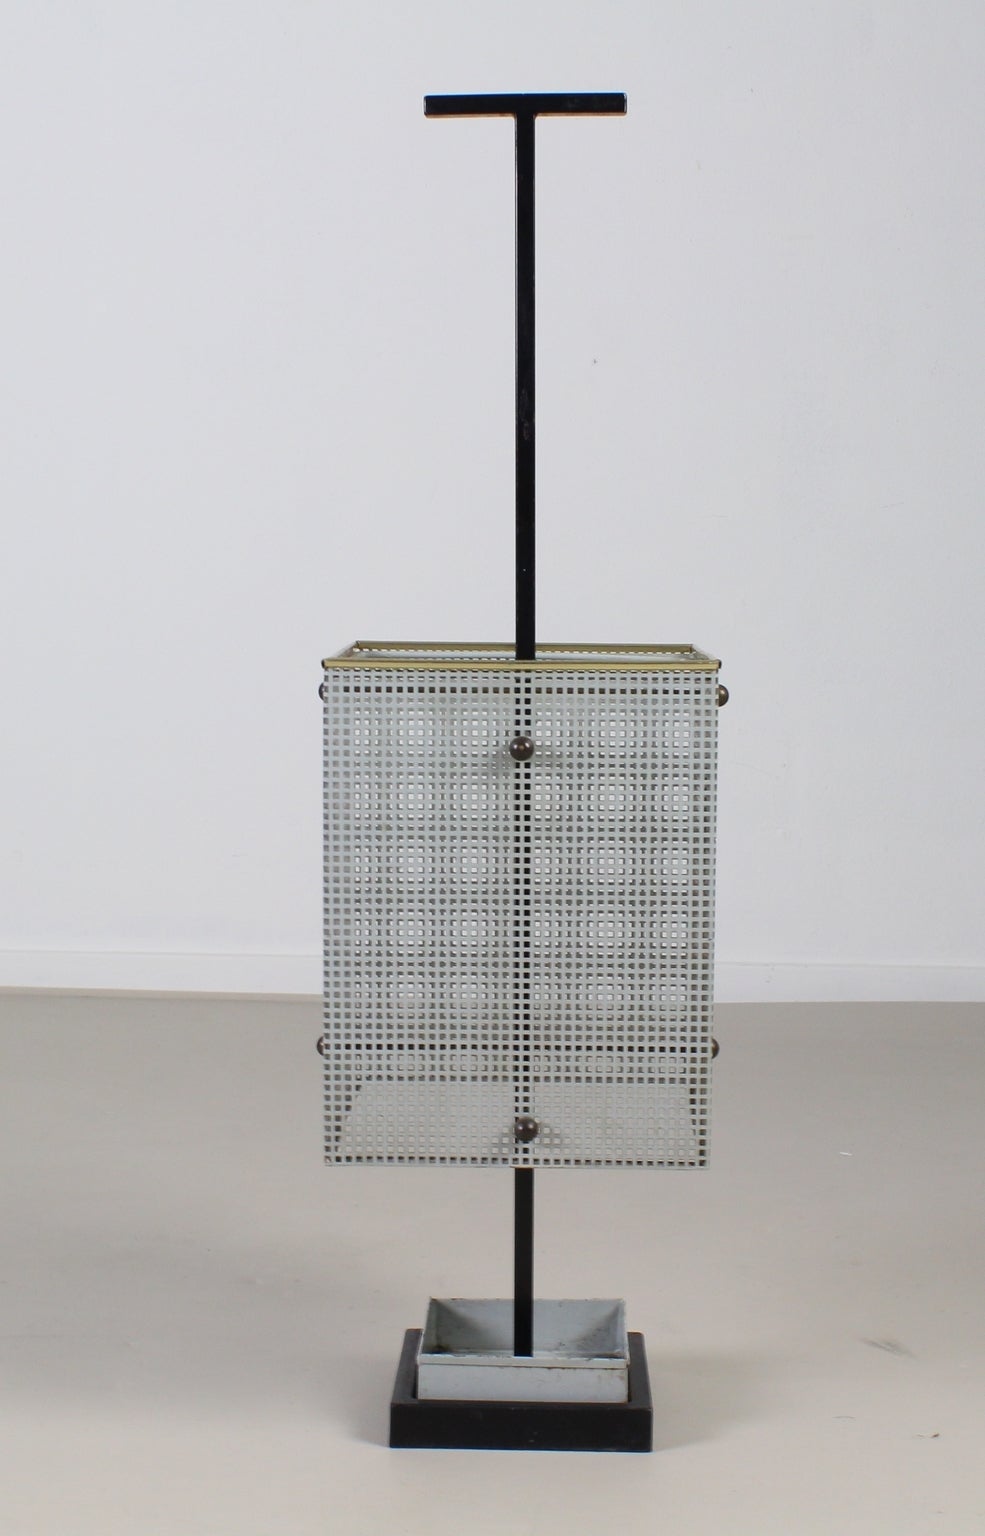 Nicely shaped umbrella stand.
Dutch design and manufacturing.
Wrought iron base with grey water reservoir.
Perforated metal bin with brass colored edge.
Nice decoration with brass ball screws.
Black metal handle.